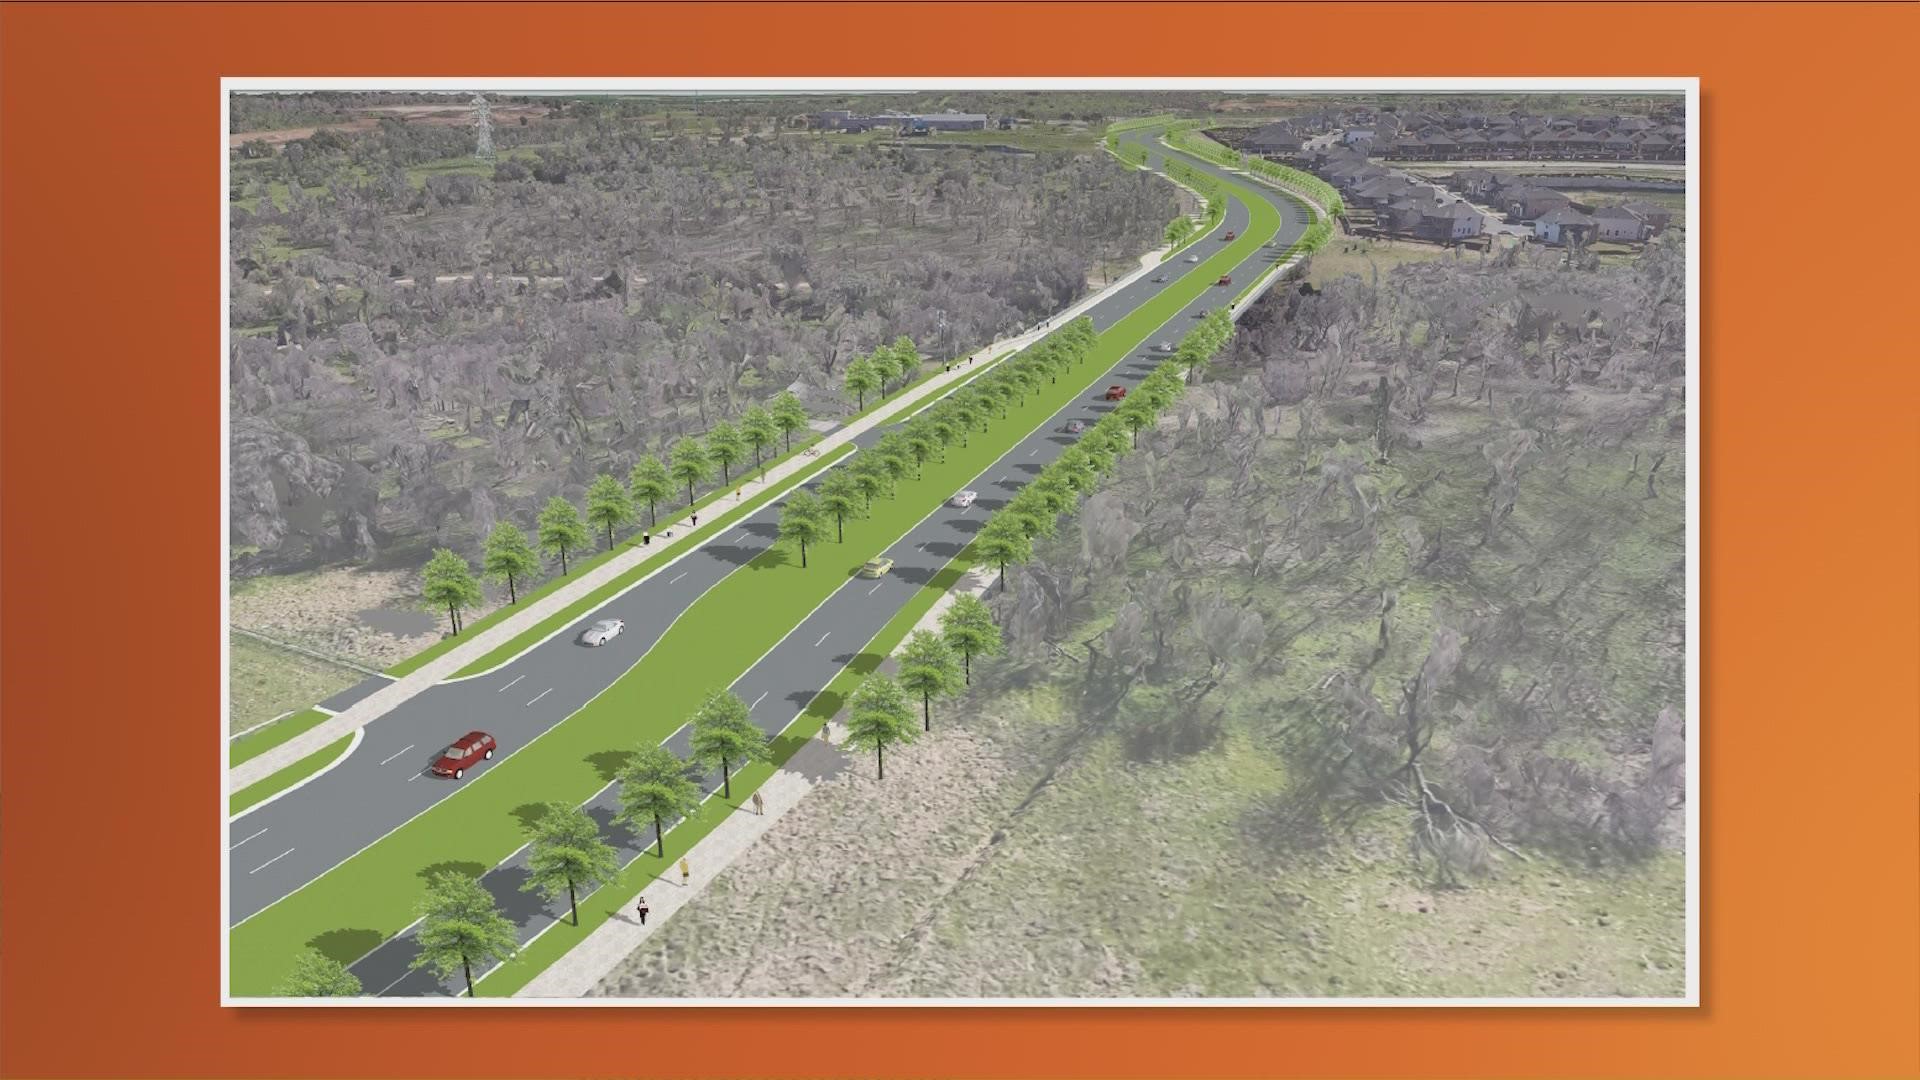 The Austin City Council approved a construction contract for improvements on William Cannon Drive in South Austin.